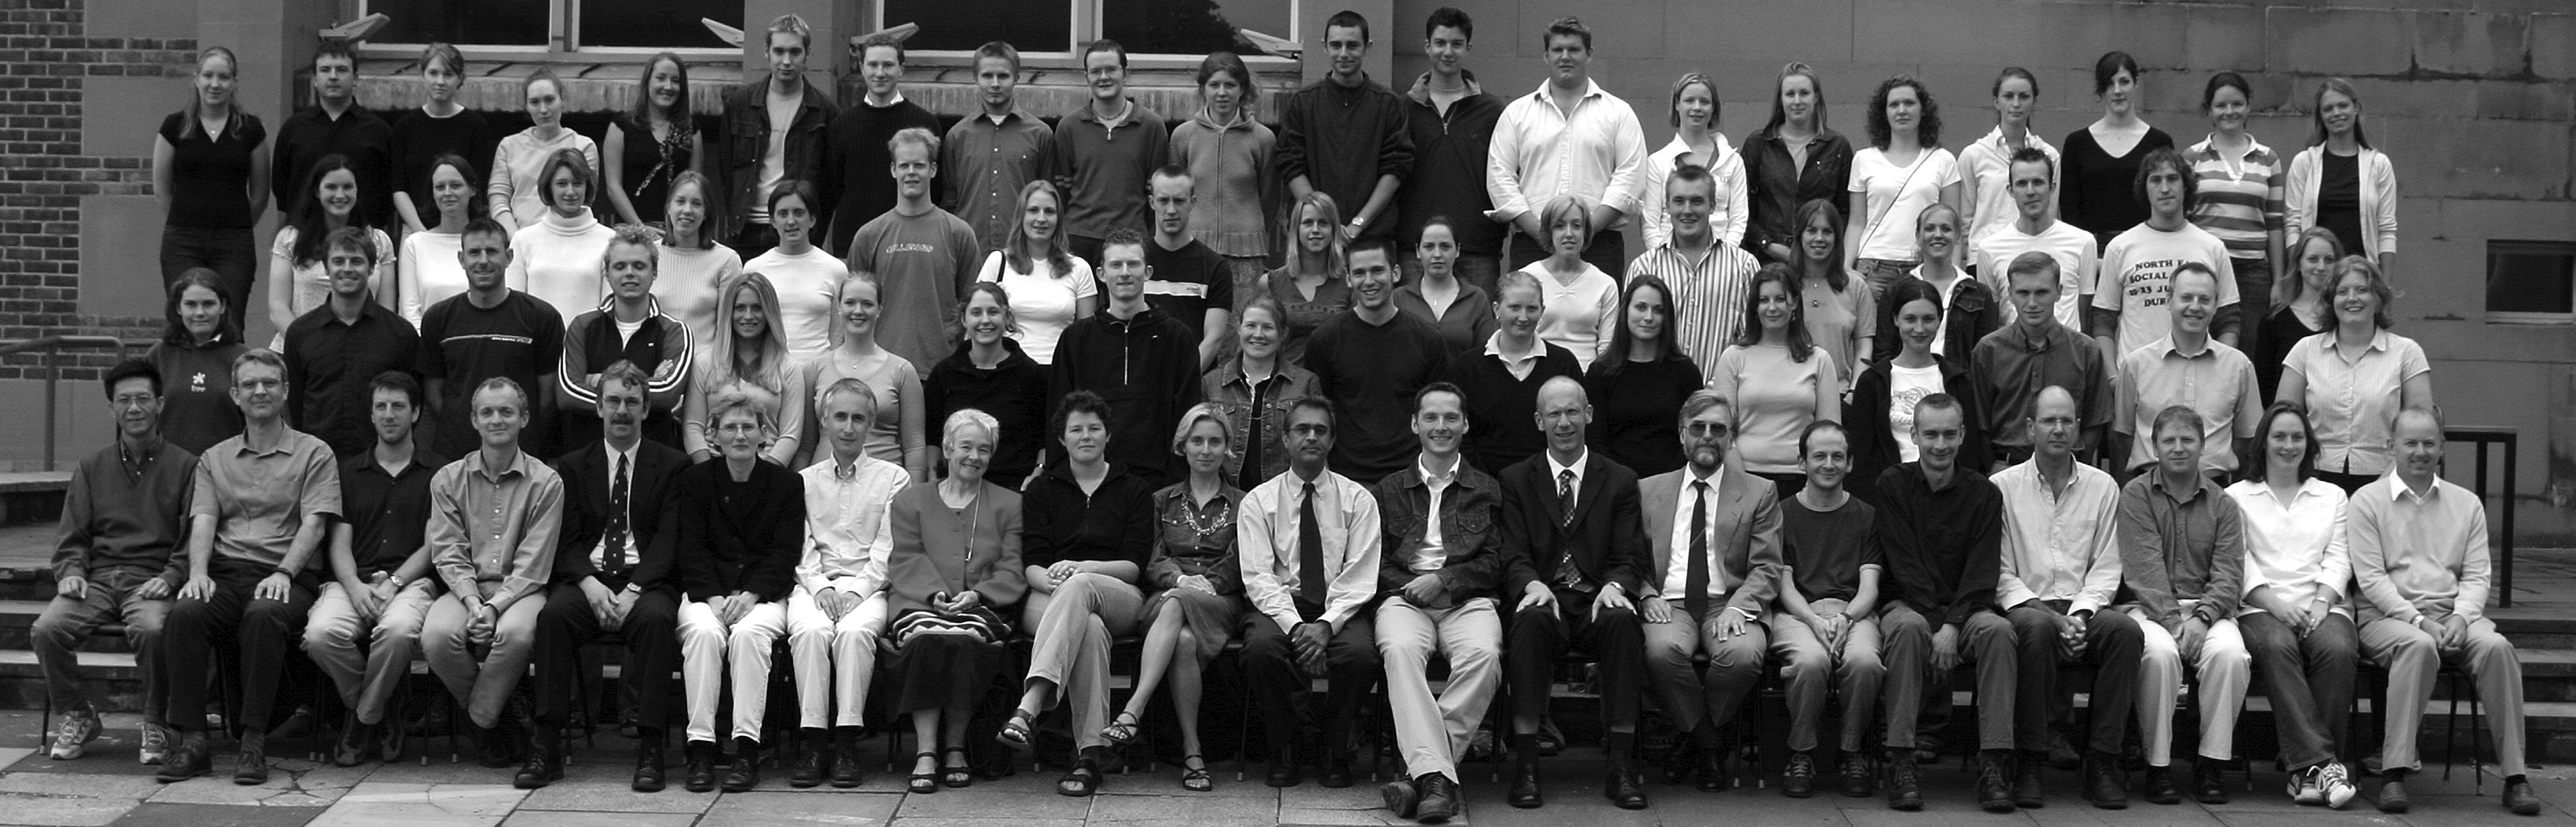 Geography Department Undergraduate Group photo from 2003